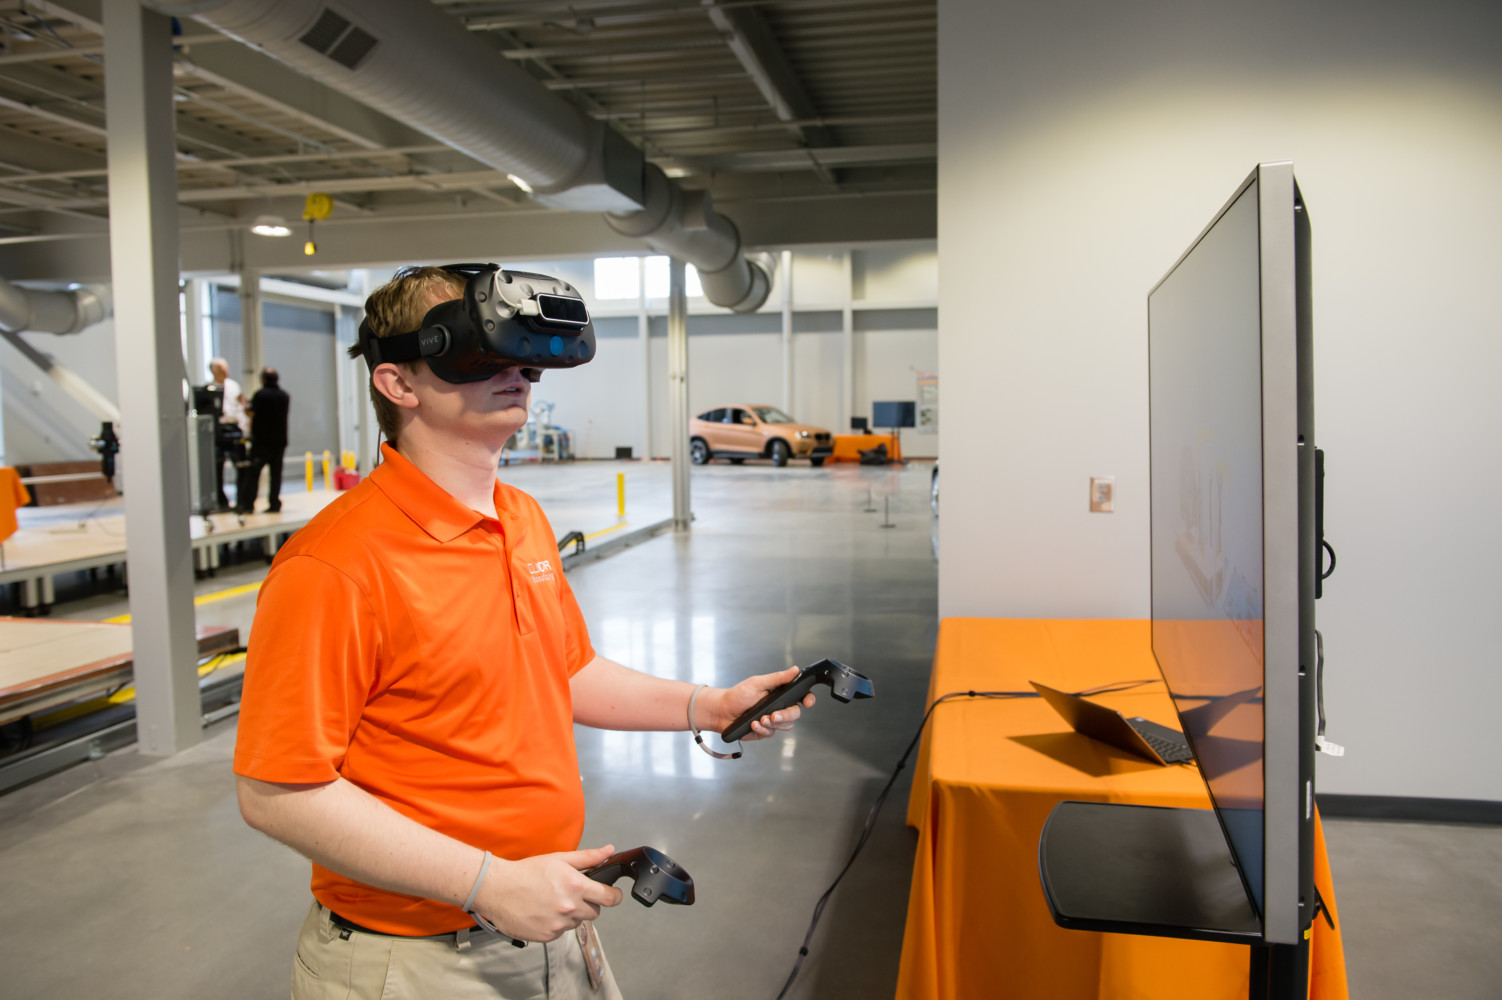 Virtual reality is the centerpiece of a new program aimed at teaching students about robotics and the jobs they are creating in advanced manufacturing.